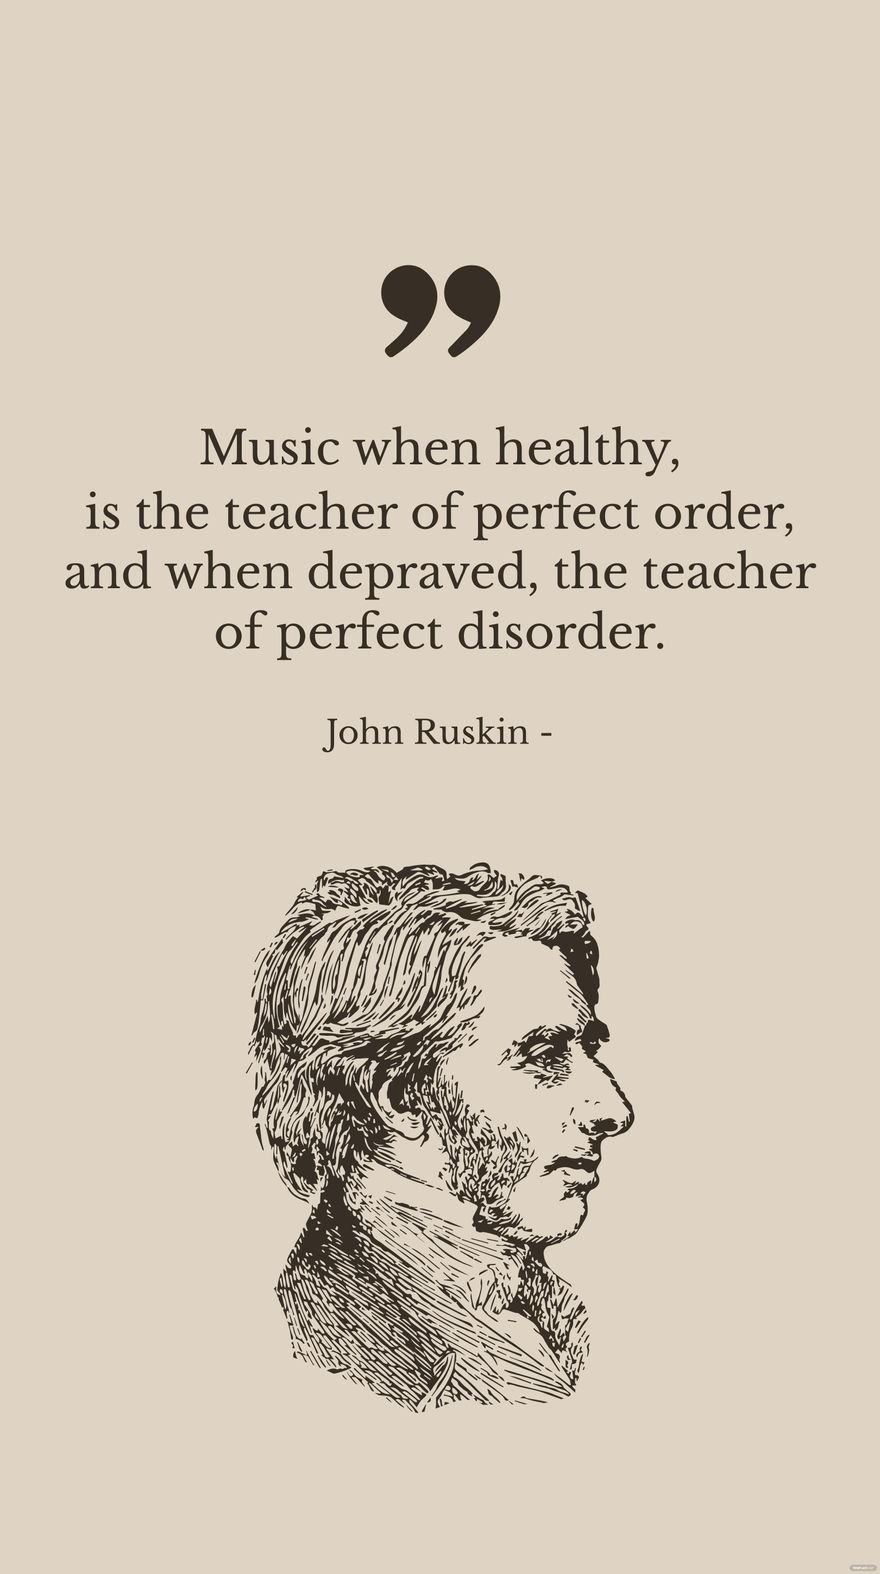 John Ruskin - Music when healthy, is the teacher of perfect order, and when depraved, the teacher of perfect disorder.